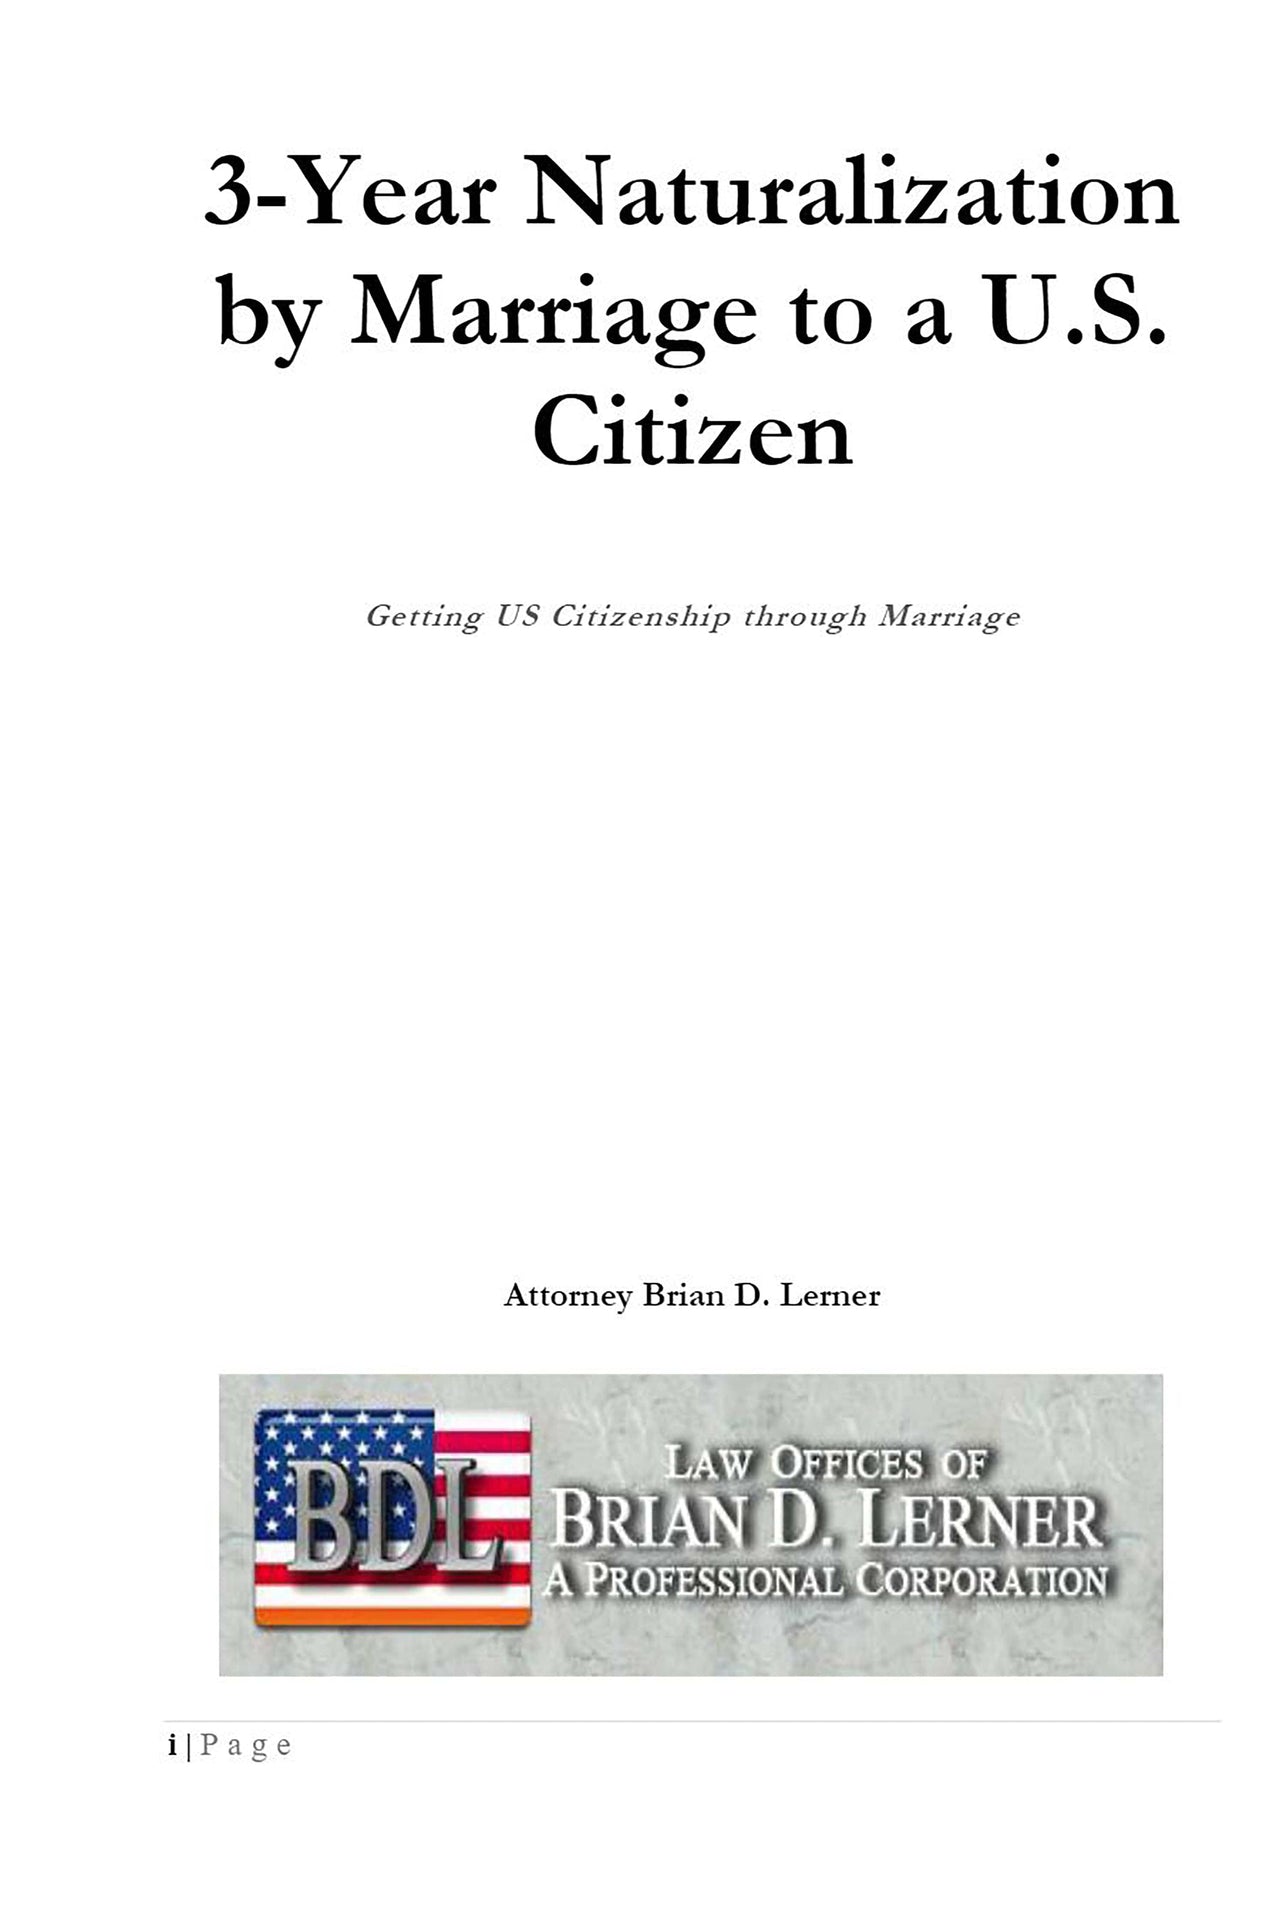 Rocket Immigration Petitions Immigration Visa 3-Year Naturalization by Marriage to a U.S. Citizen